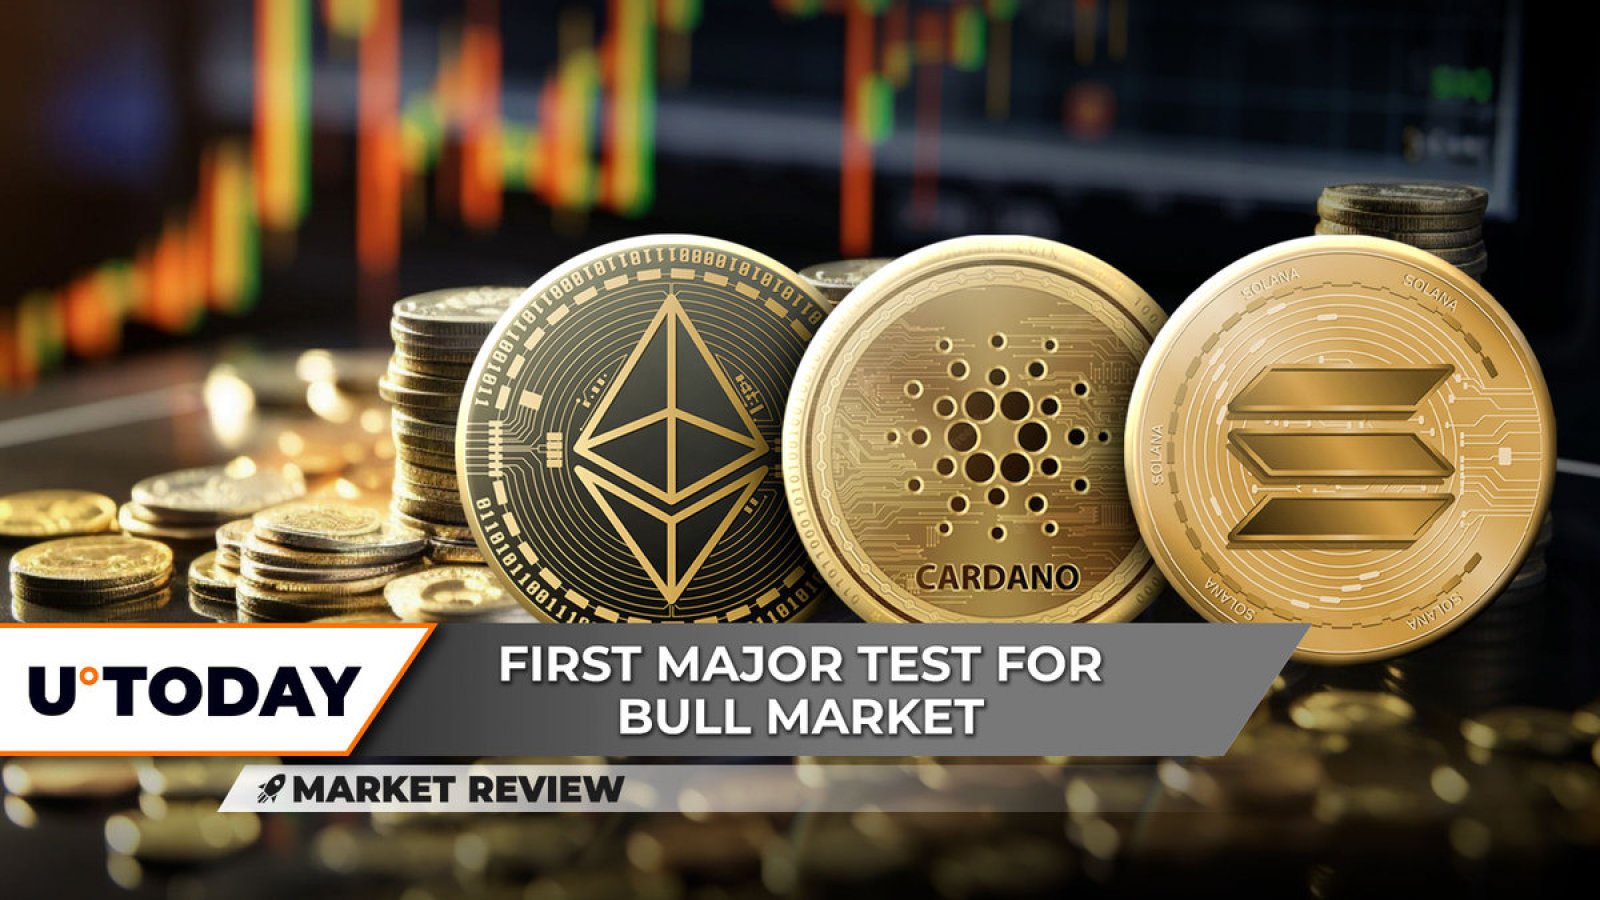 Cardano (ADA) volume shows dangerous trend, Ethereum: is there a problem?  Solana (SOL) on the verge of reversal